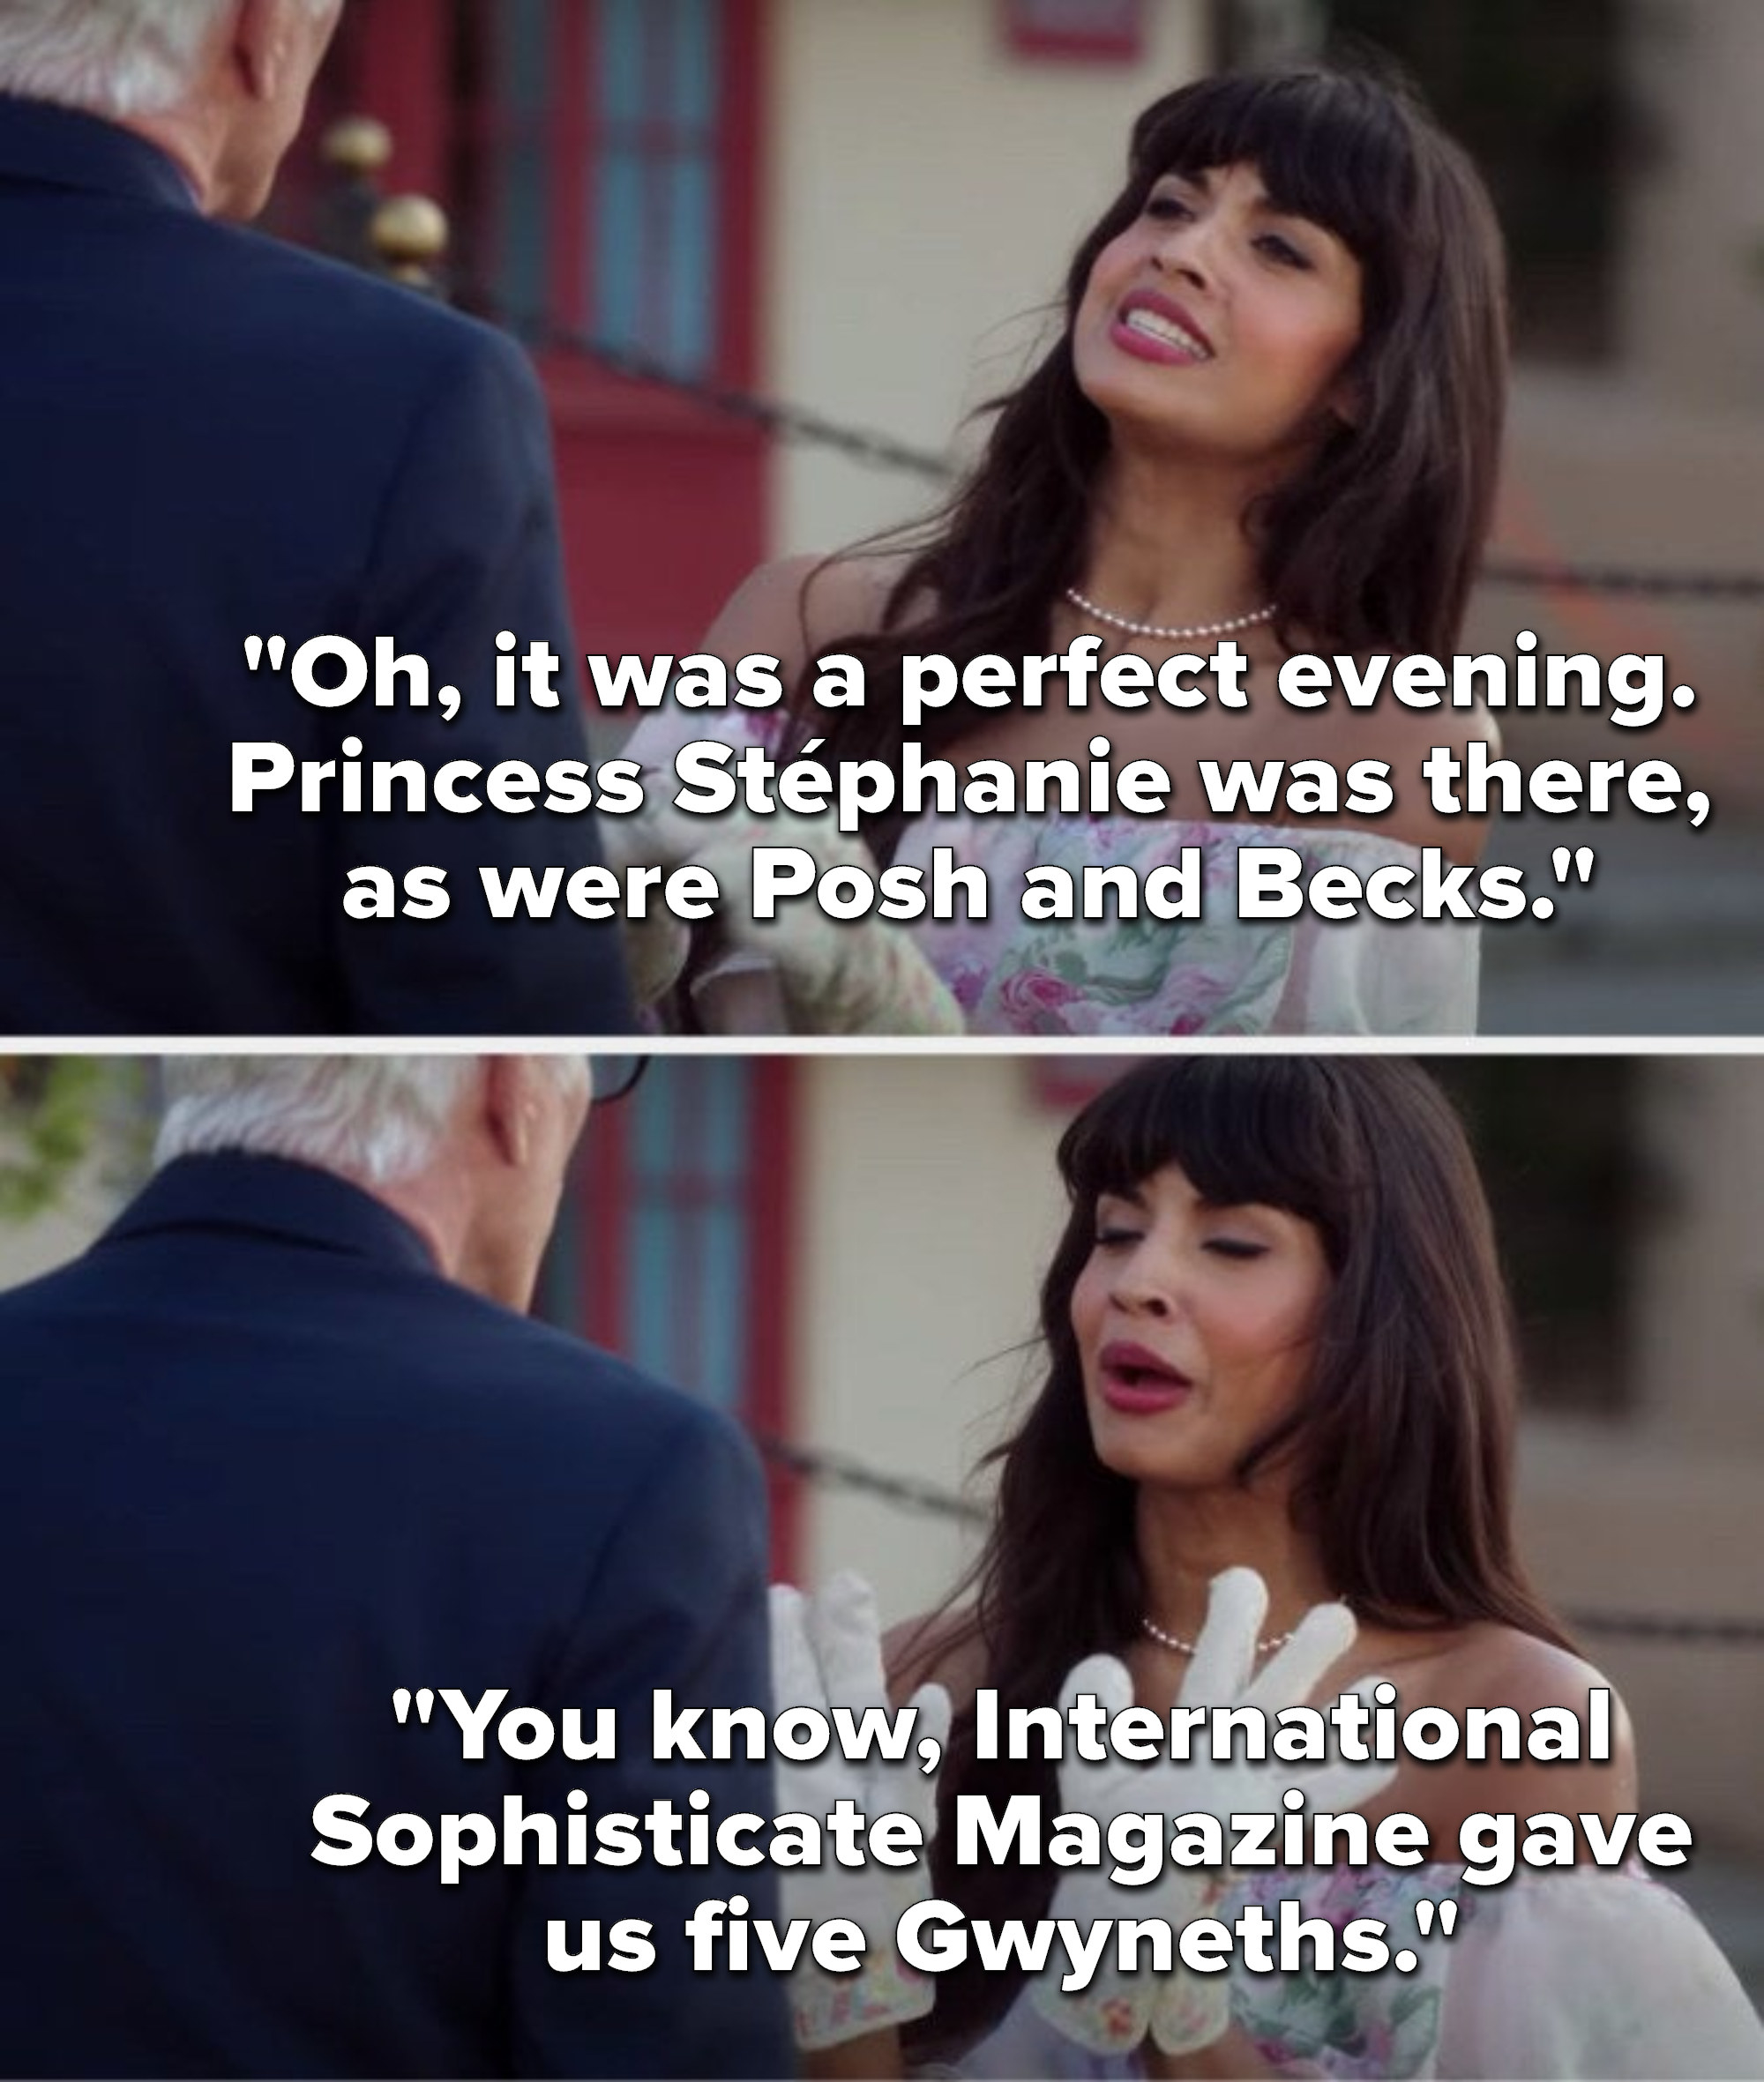 Tahani says, Oh, it was a perfect evening, Princess Stéphanie was there, as were Posh and Becks, you know, International Sophisticate Magazine gave us five Gwyneths